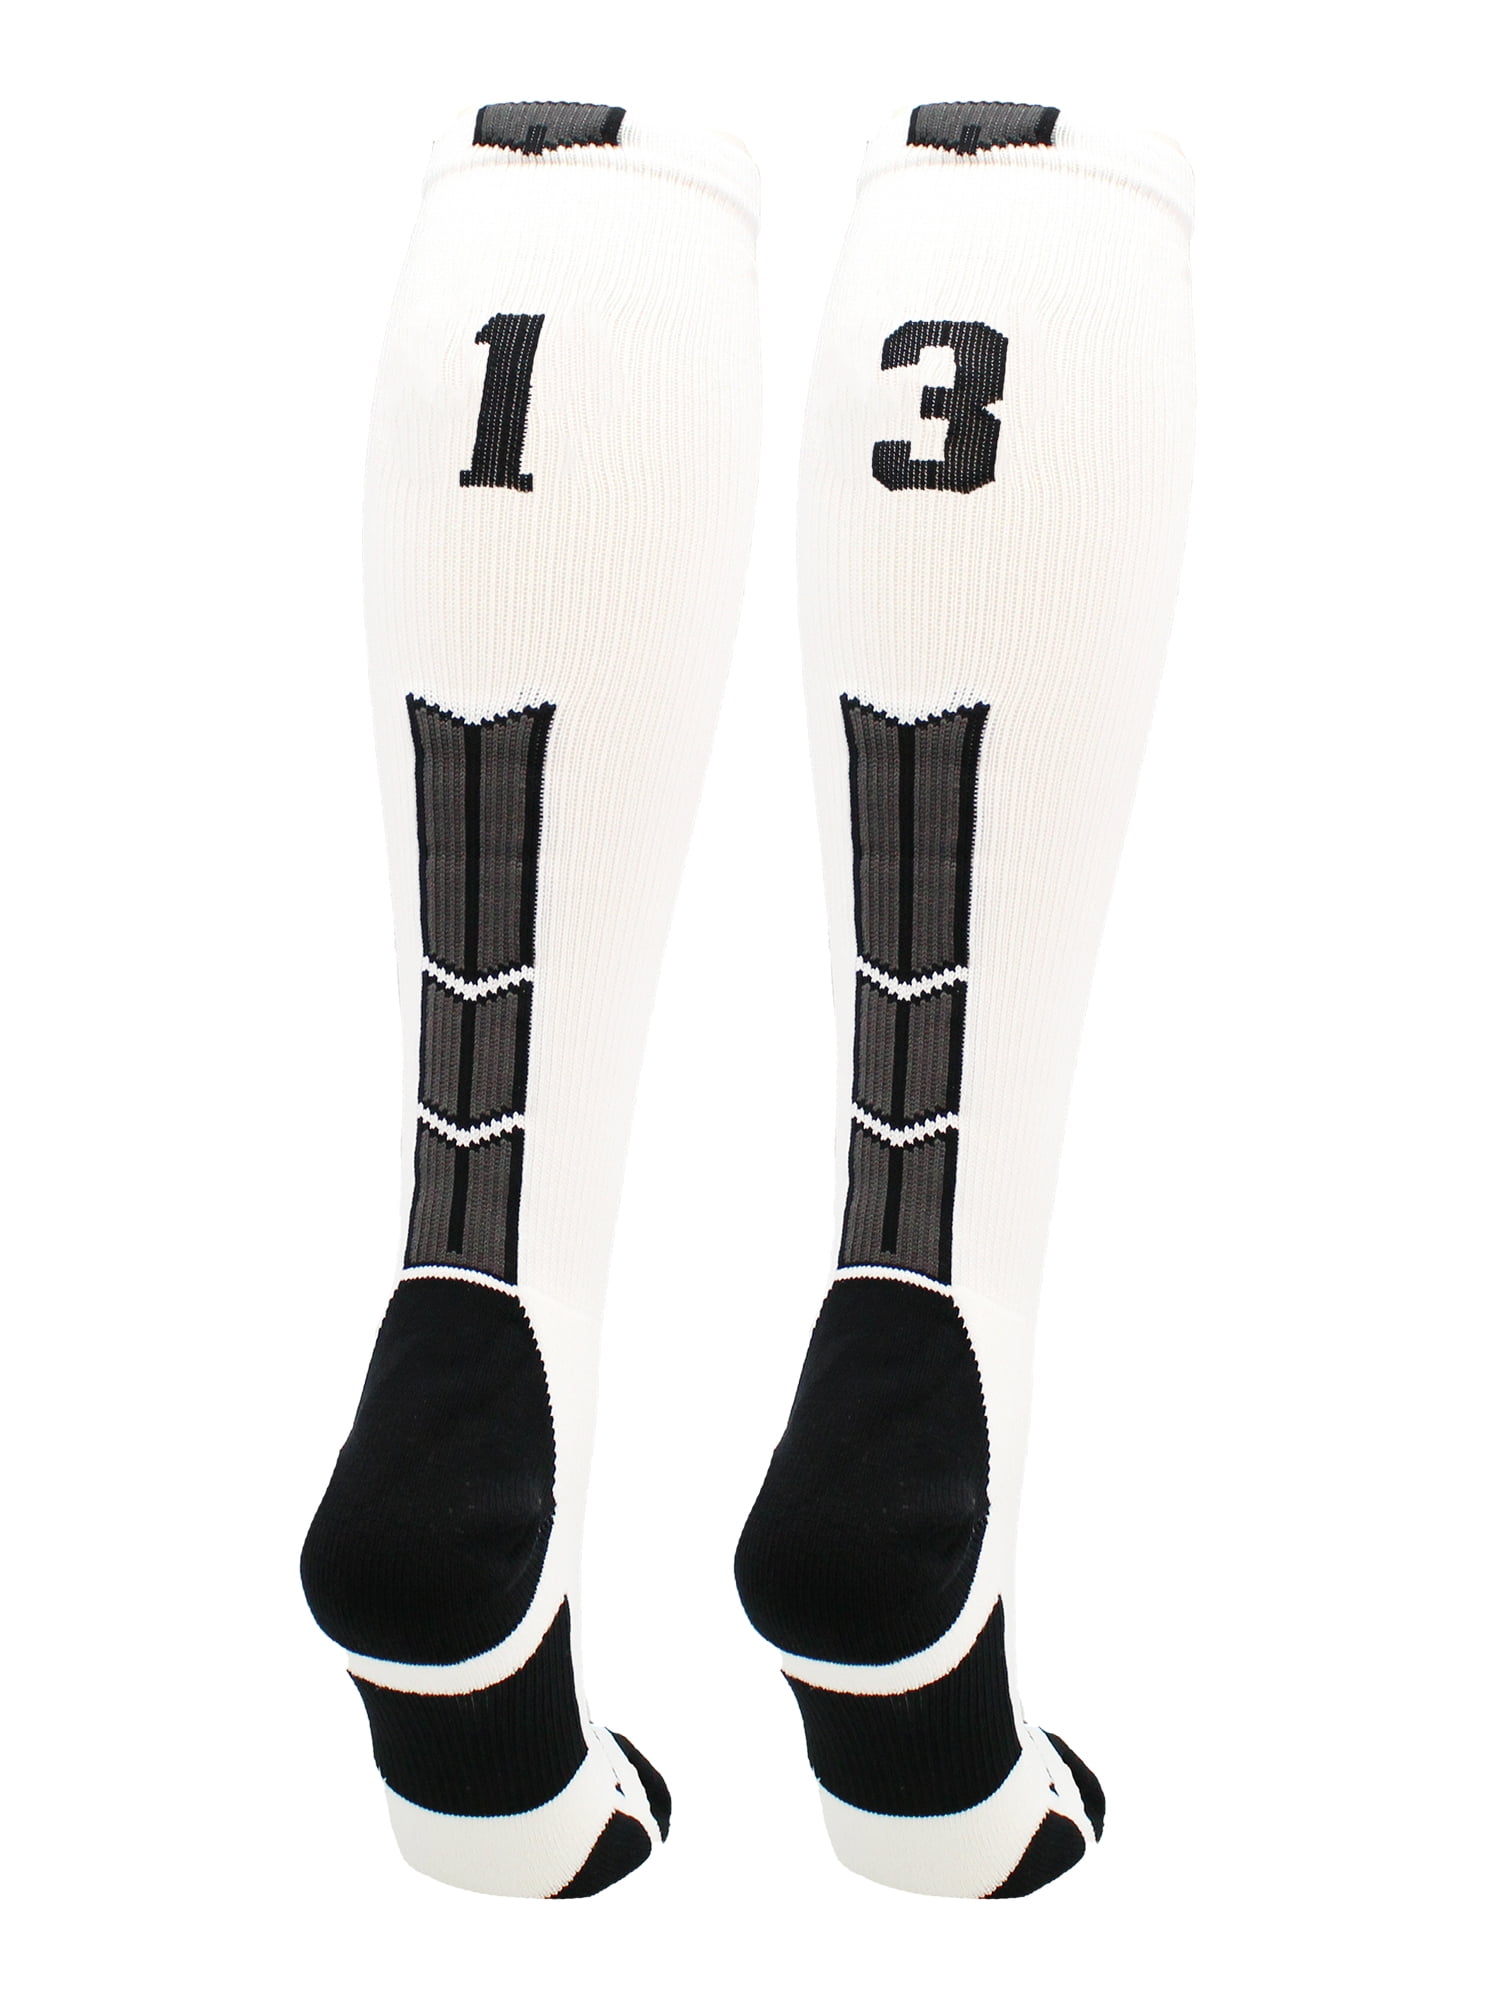 Player Id Jersey Number Socks Over the Calf Length Neon Pink and Black 